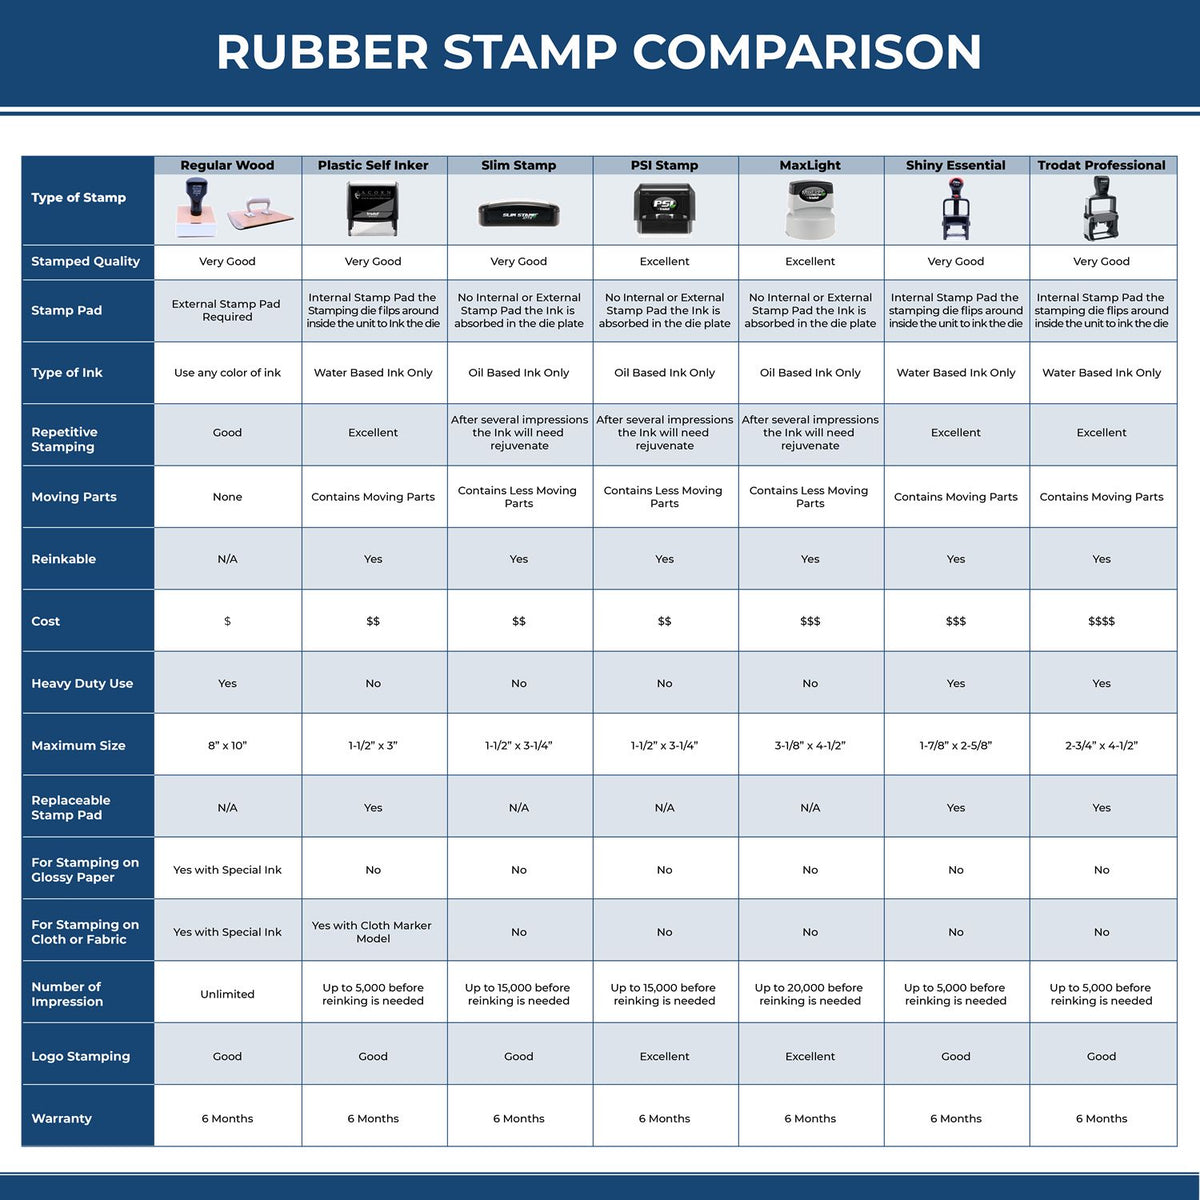 Large Post Dated Rubber Stamp 4576R Rubber Stamp Comparison